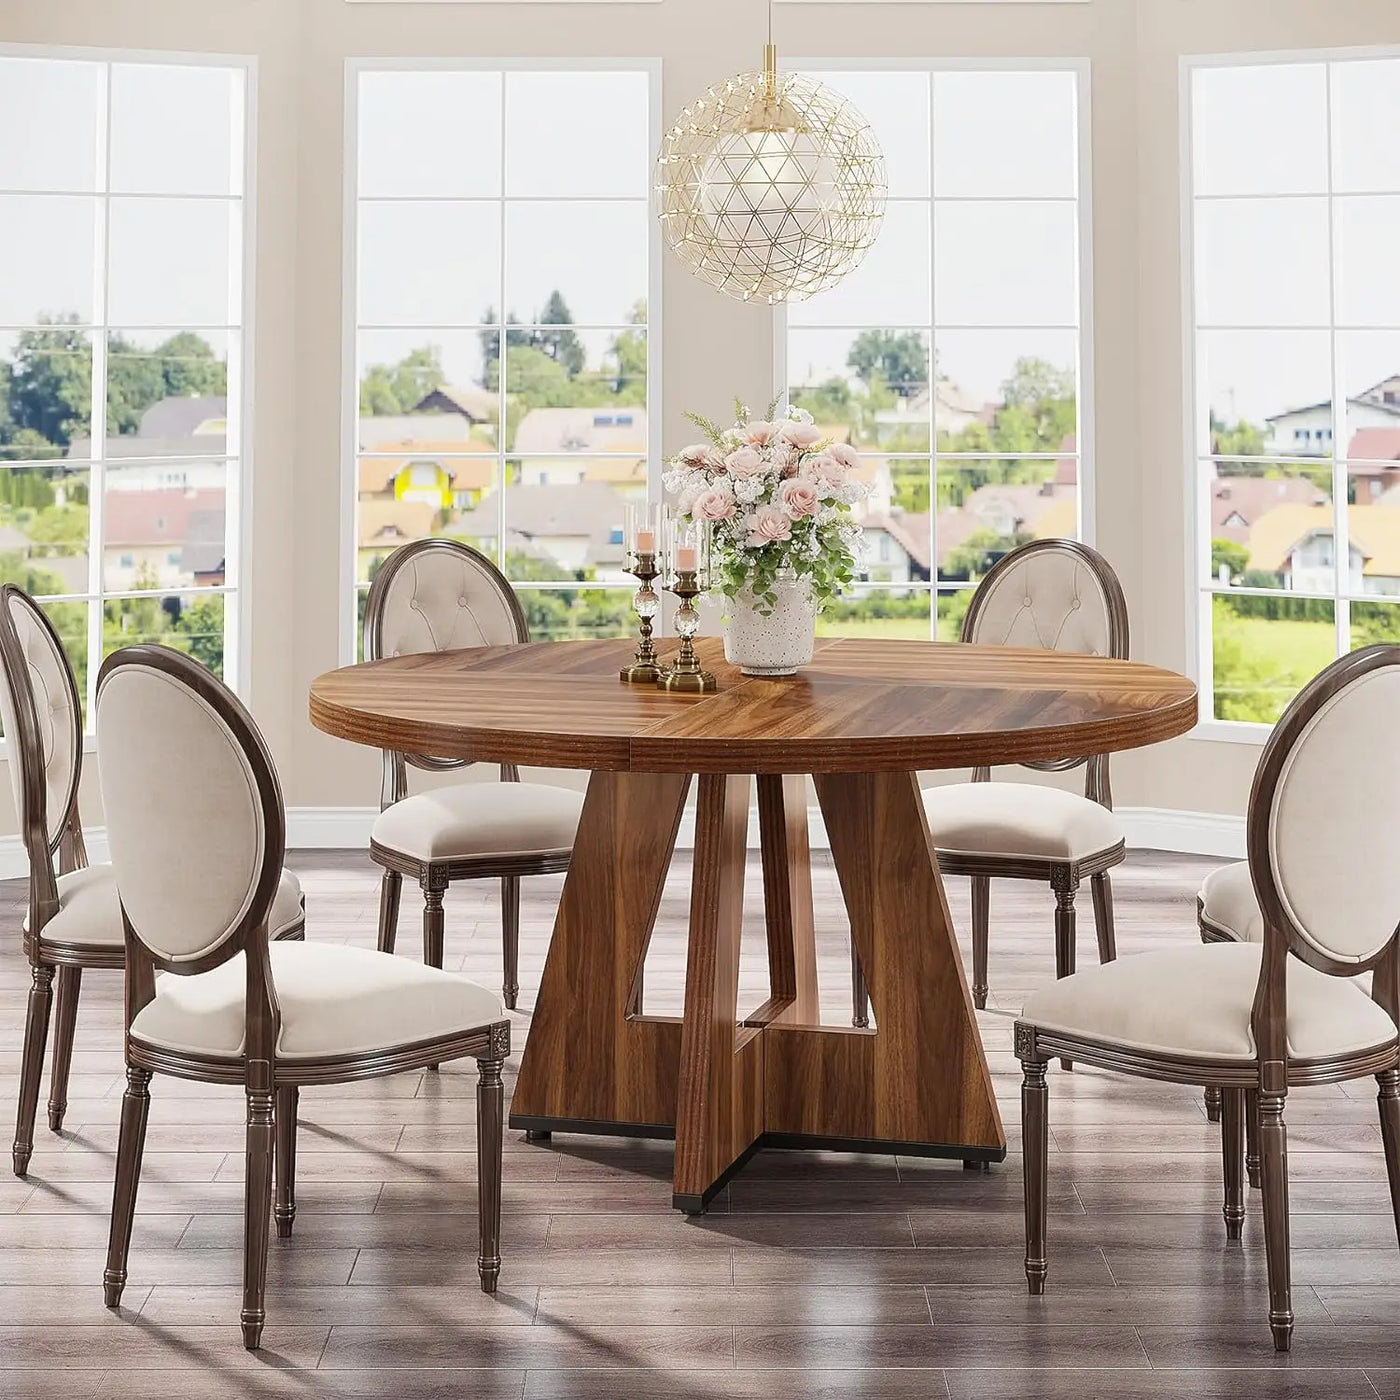 Rainier Round Dining Table 47 Inch | Farmhouse Kitchen Dinner Table Wood for Dining Room